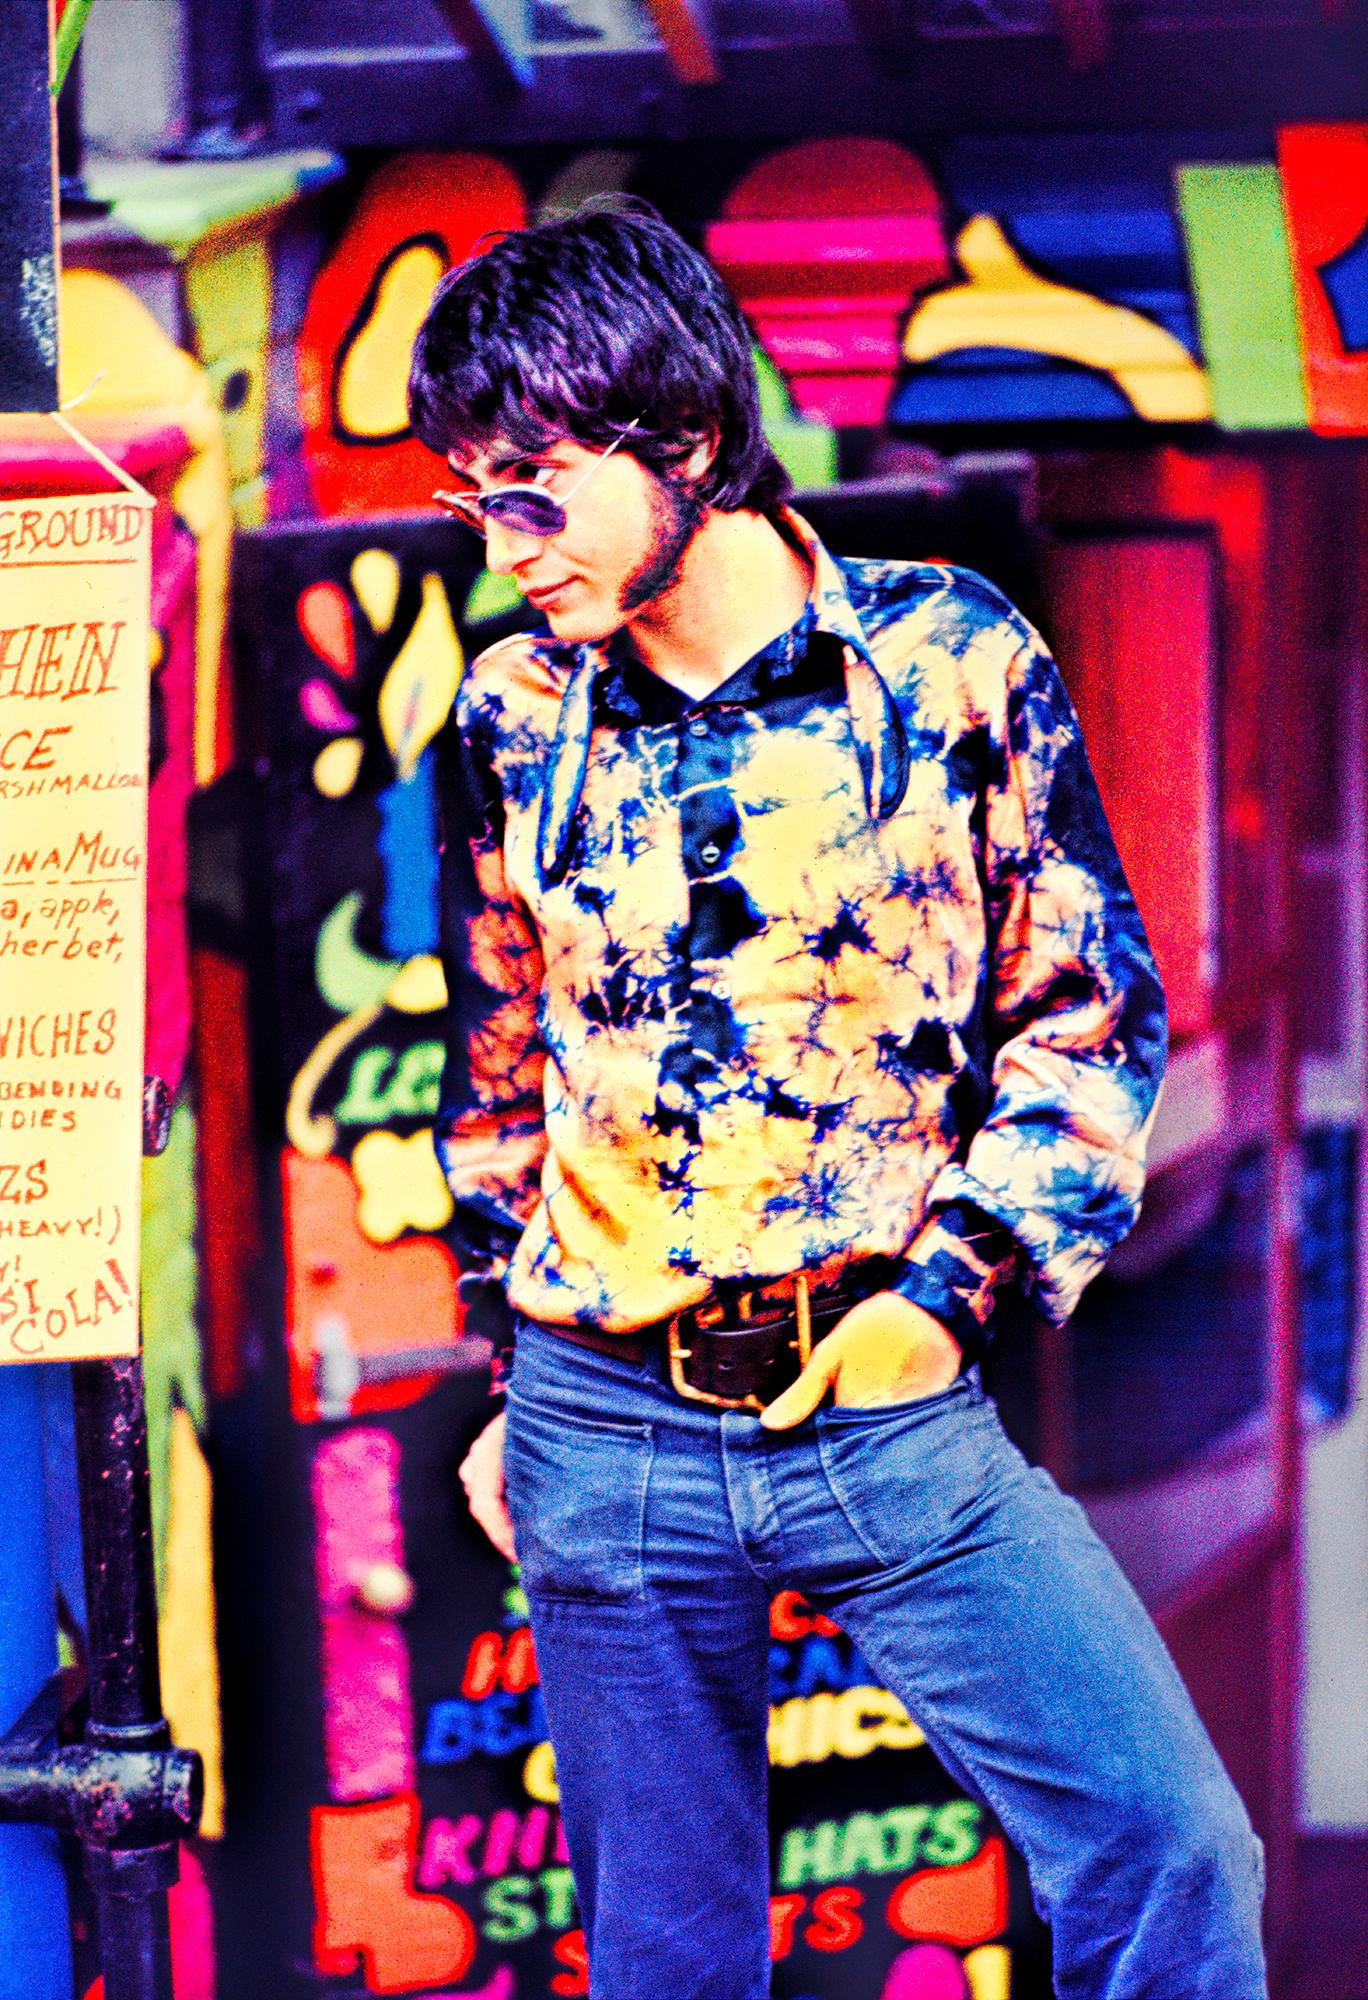 Mitchell Funk Color Photograph - Groovy Portrait. Hippy at Psychedelic Head Shop St. Mark's Place, East Village